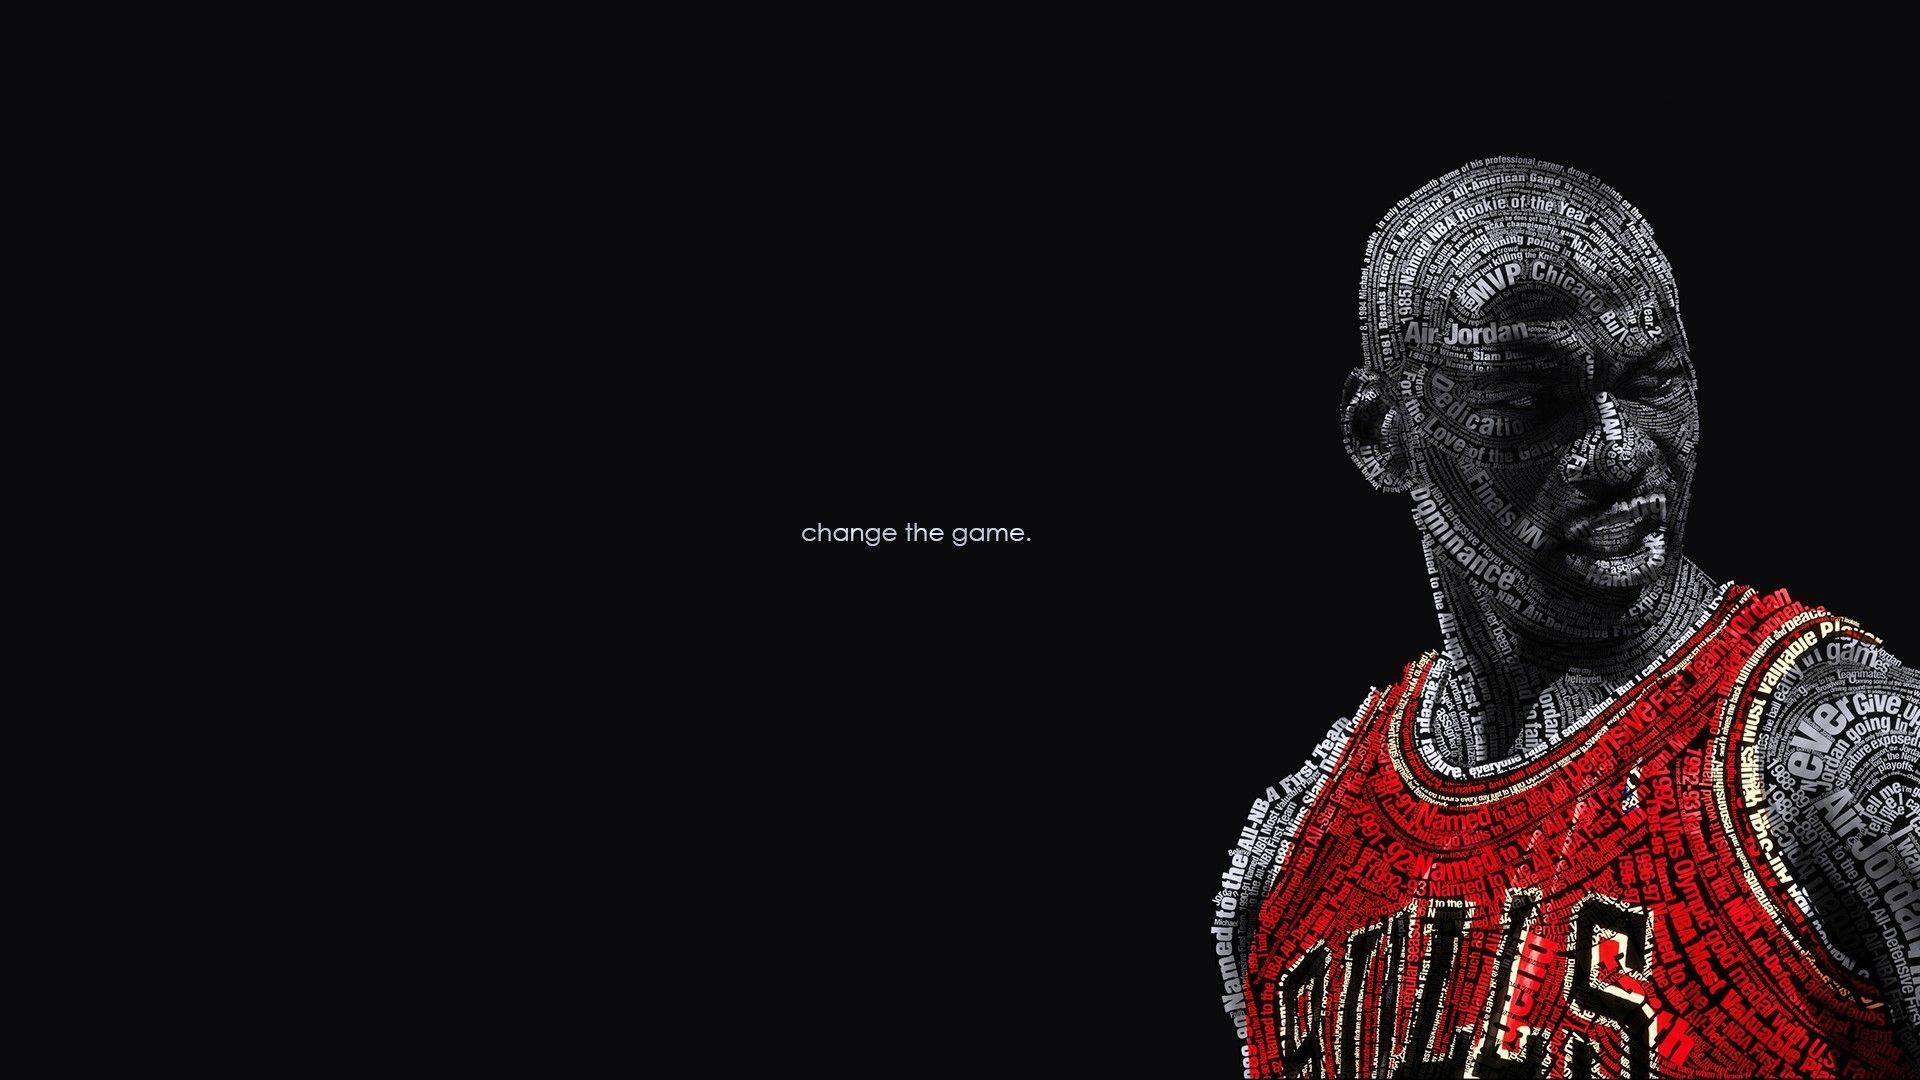 Basketball Wallpapers High Quality Download Free